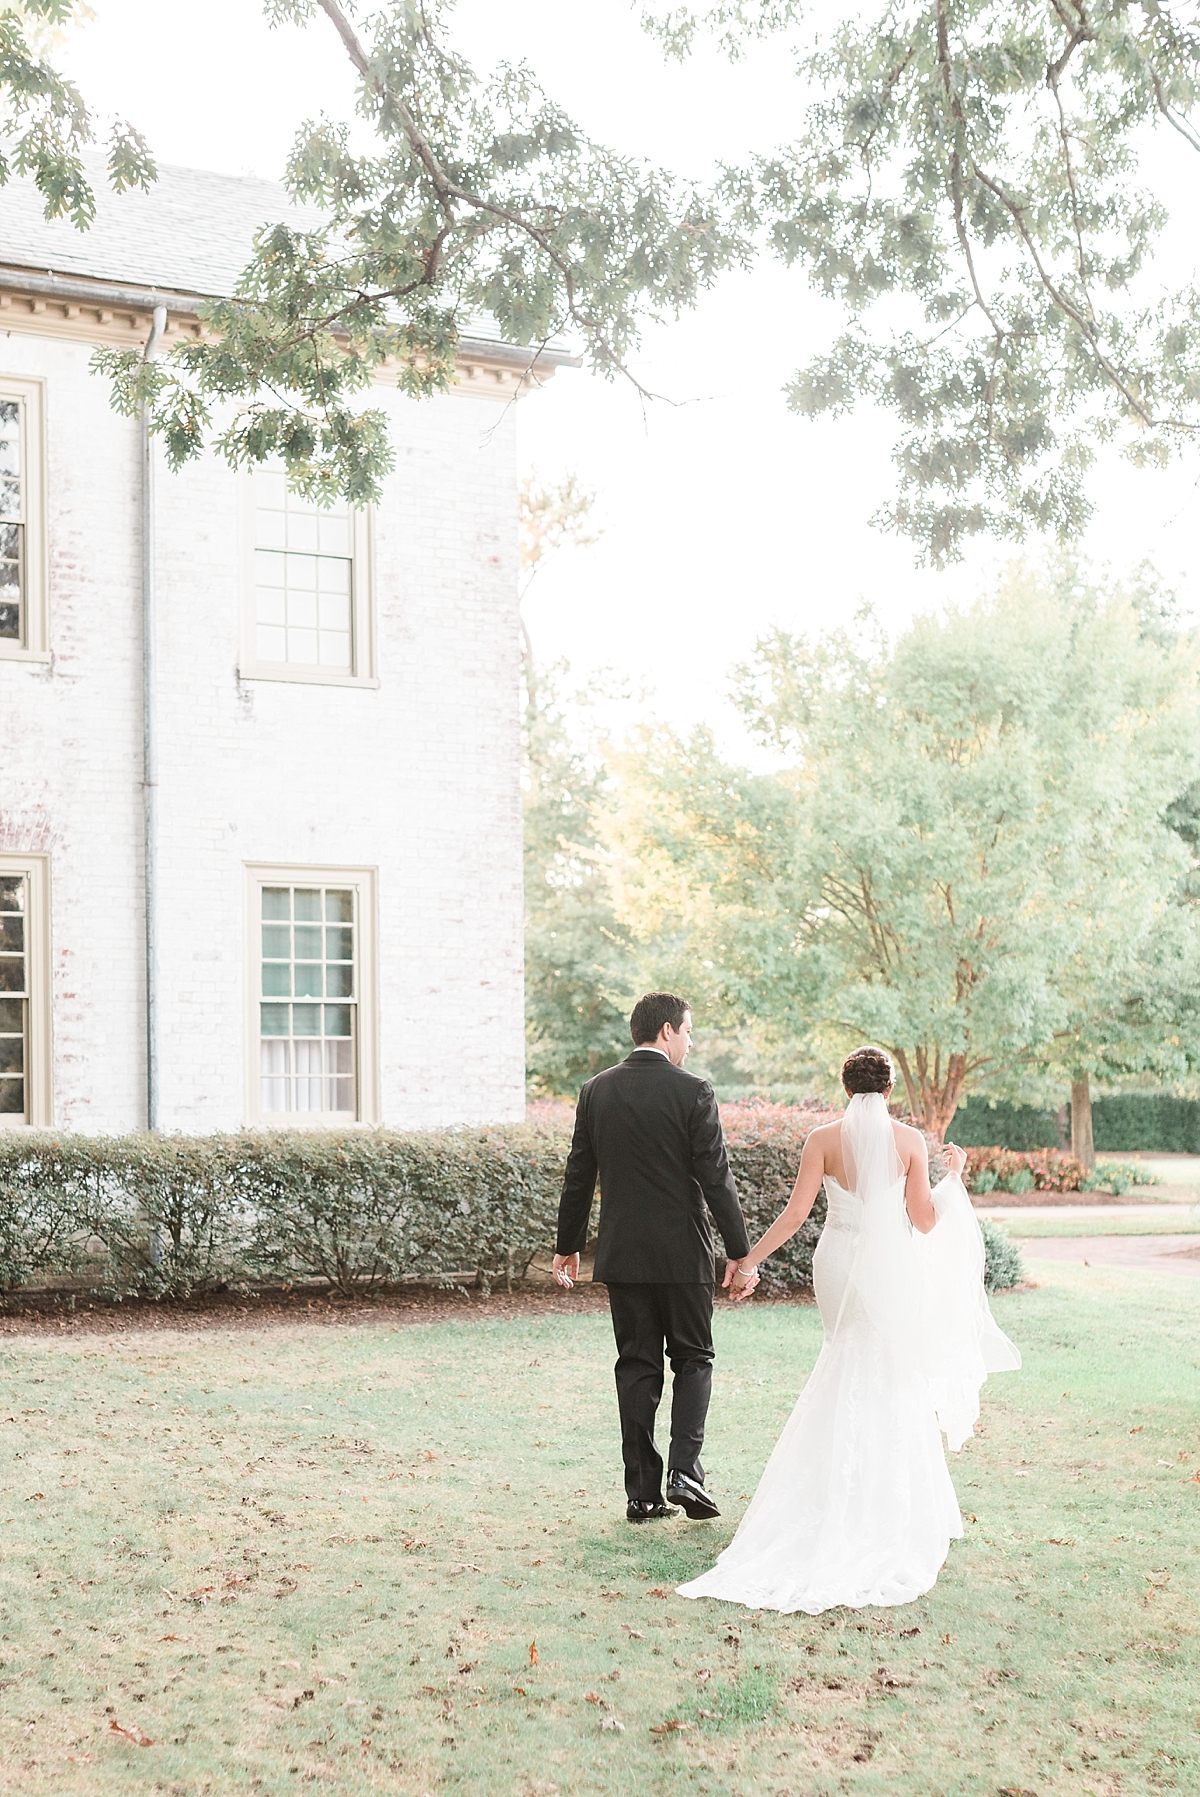 A gorgeous black-tie Kate Spade themed wedding held is at The Williamsburg Inn in Virginia and photographed by Washington, DC photographer Alicia Lacey. 